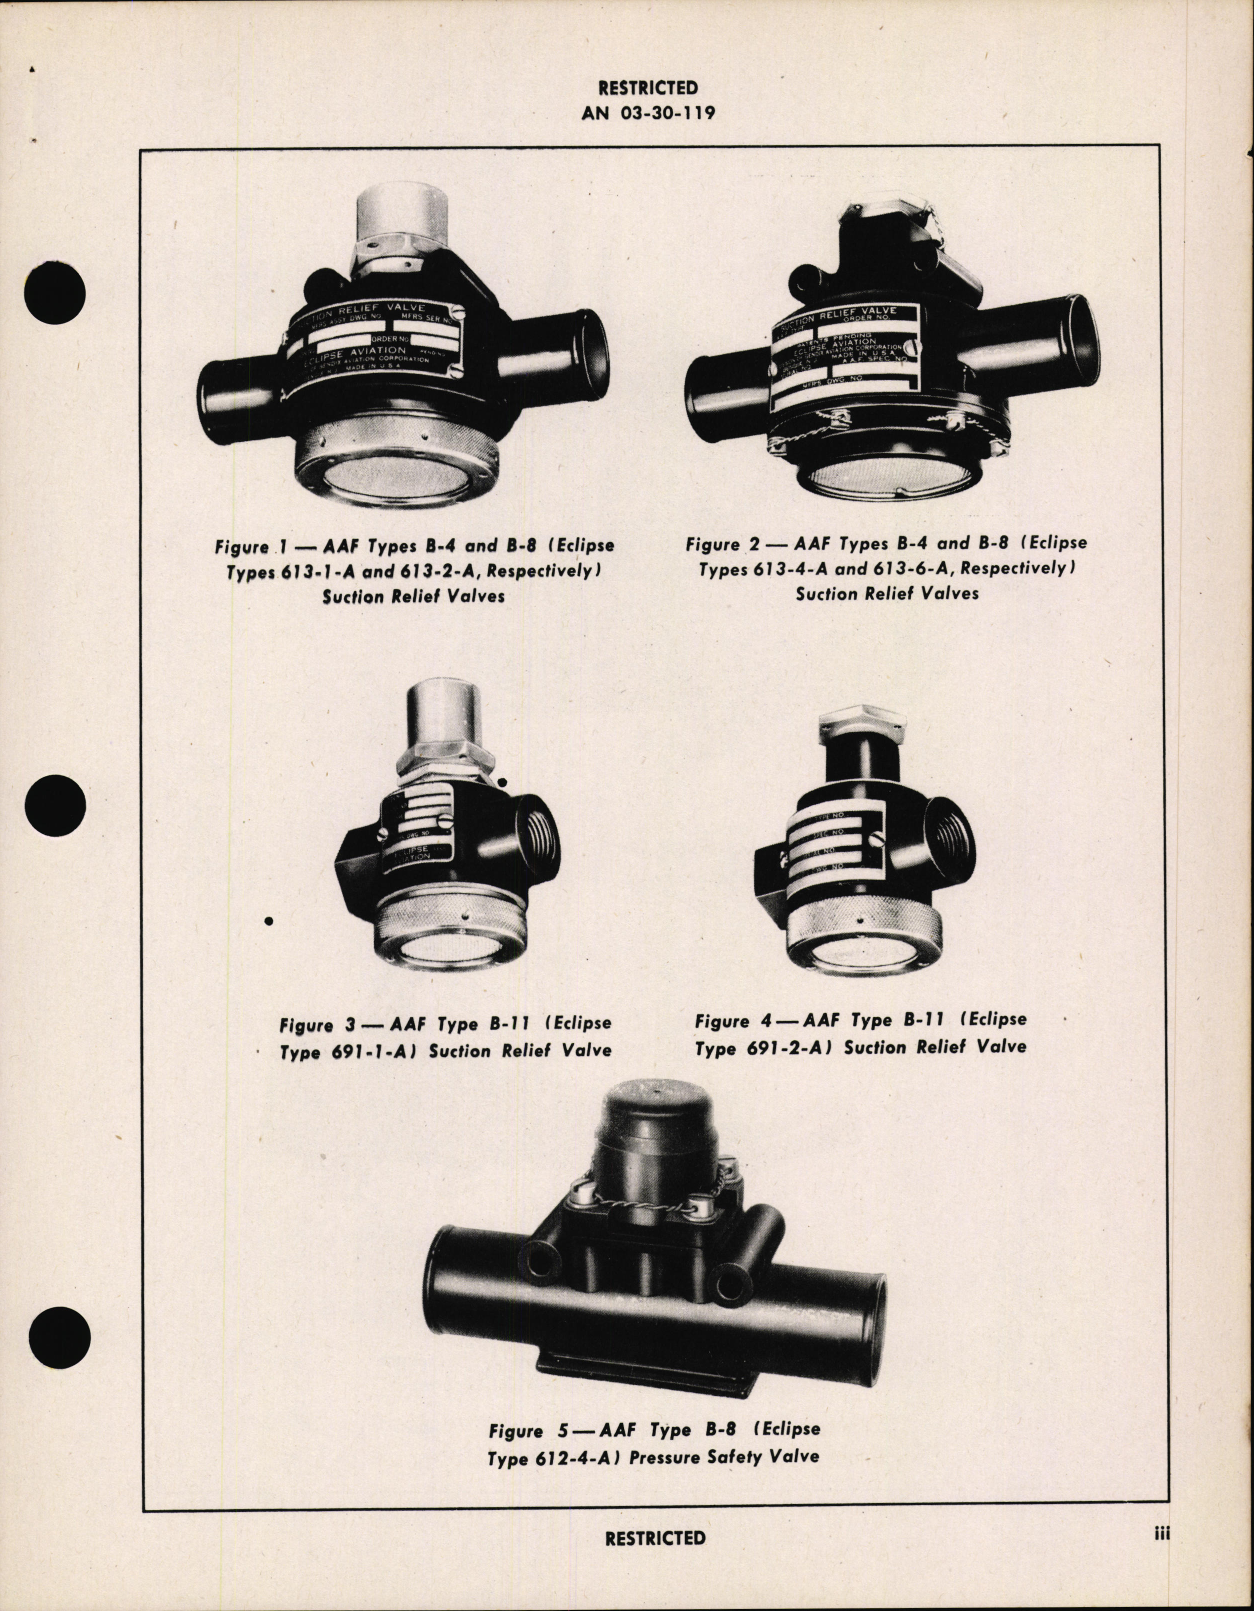 Sample page 5 from AirCorps Library document: Handbook of Instructions with Parts Catalog for Pneumatic System Valves